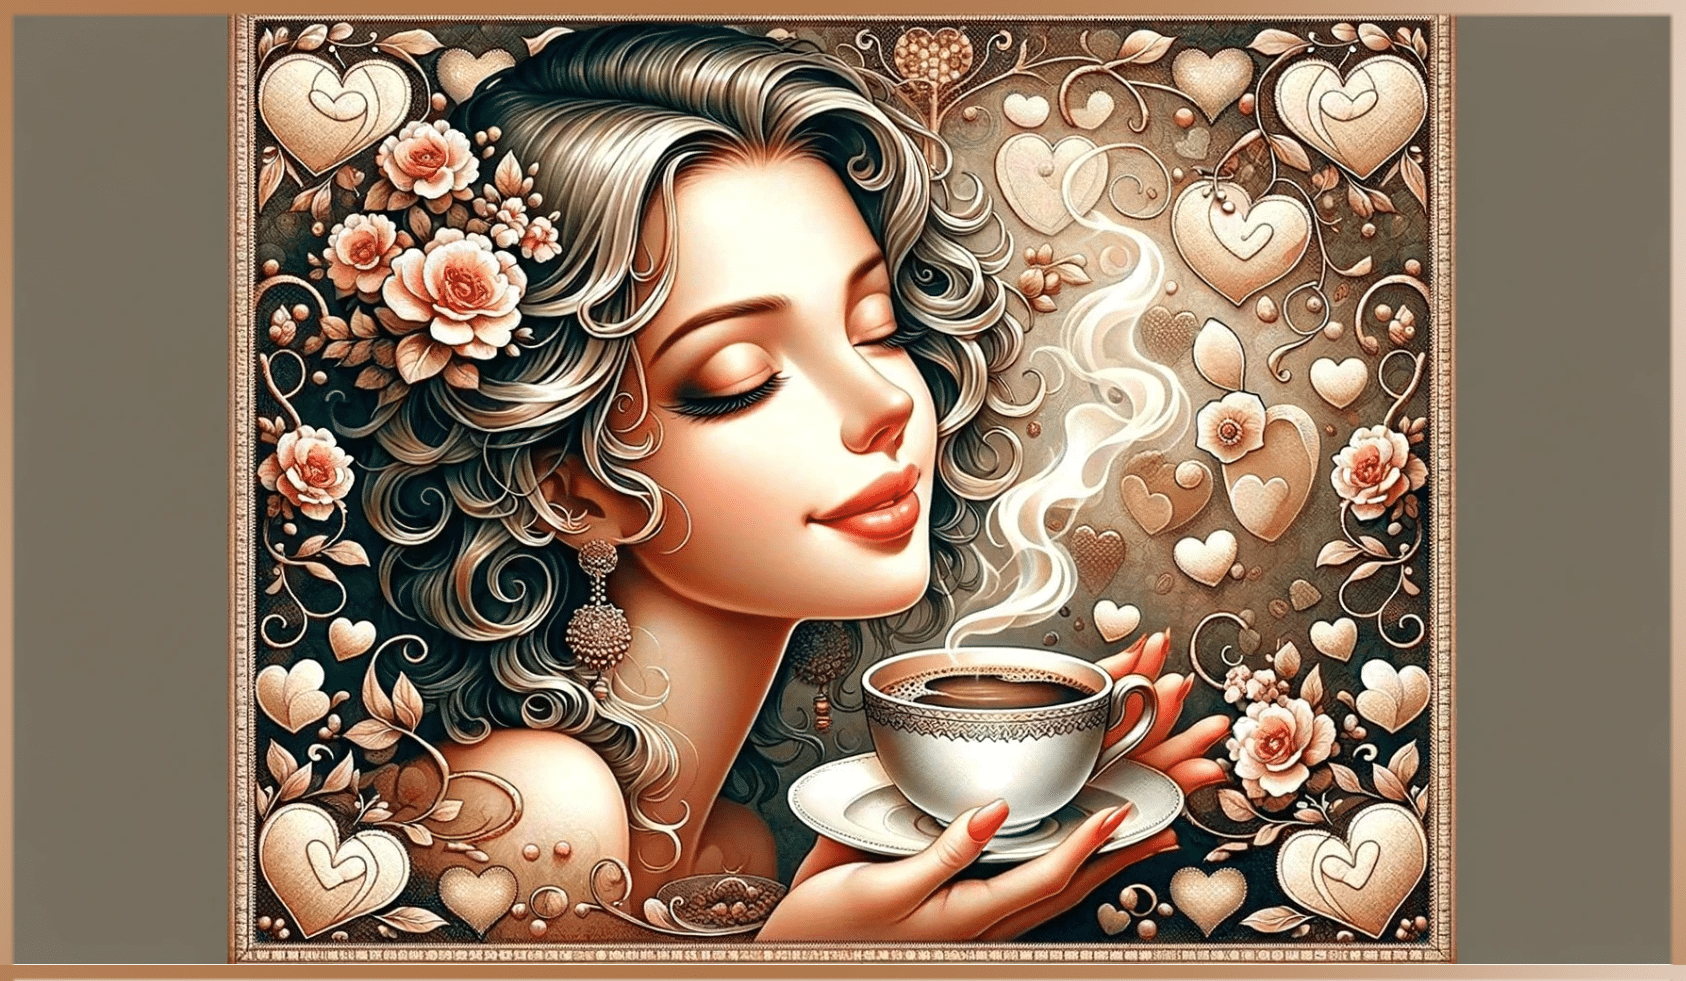 A serene woman enjoying the scent of coffee surrounded by heart motifs and floral designs